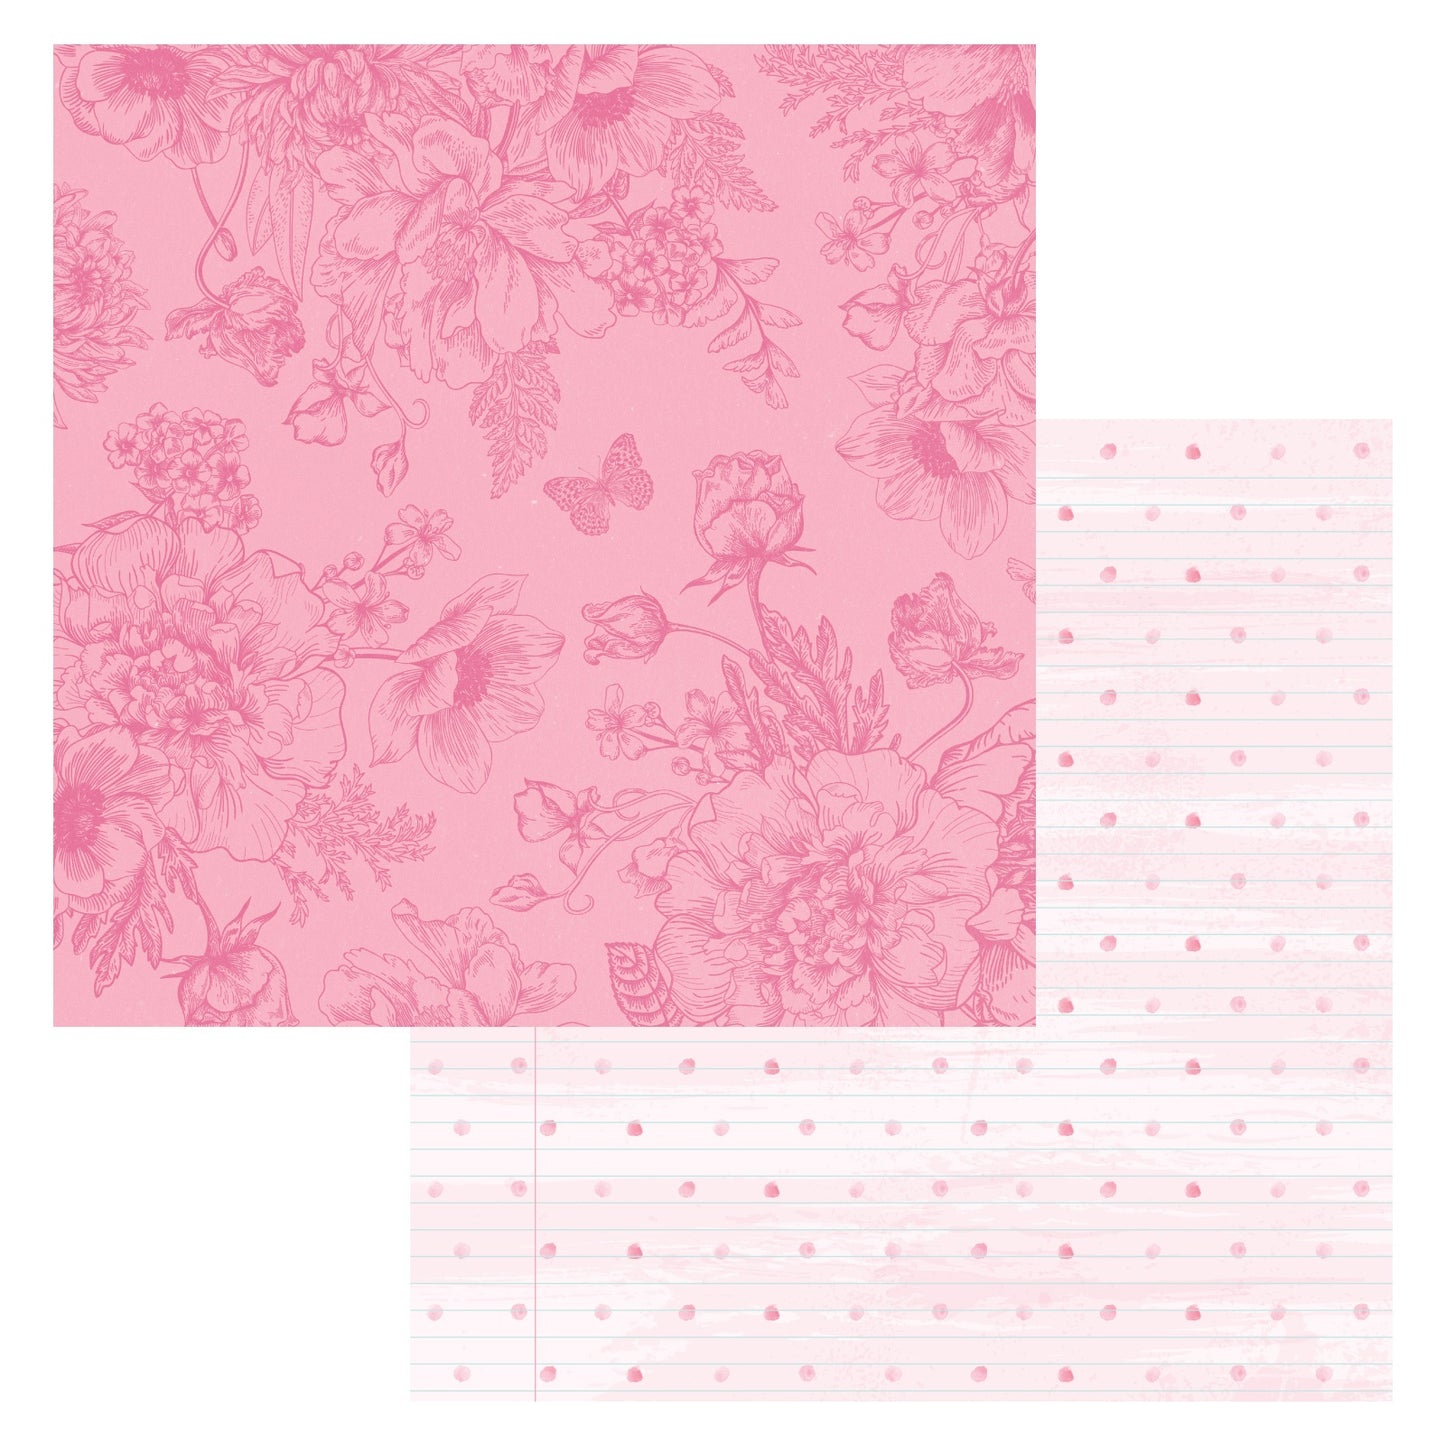 Stamperia 12x12 Garden Cardstock Double Sided Cardstock 12x12 Paper 12x12  Garden Cardstock Cardstock for Scrapbooking 23-096 